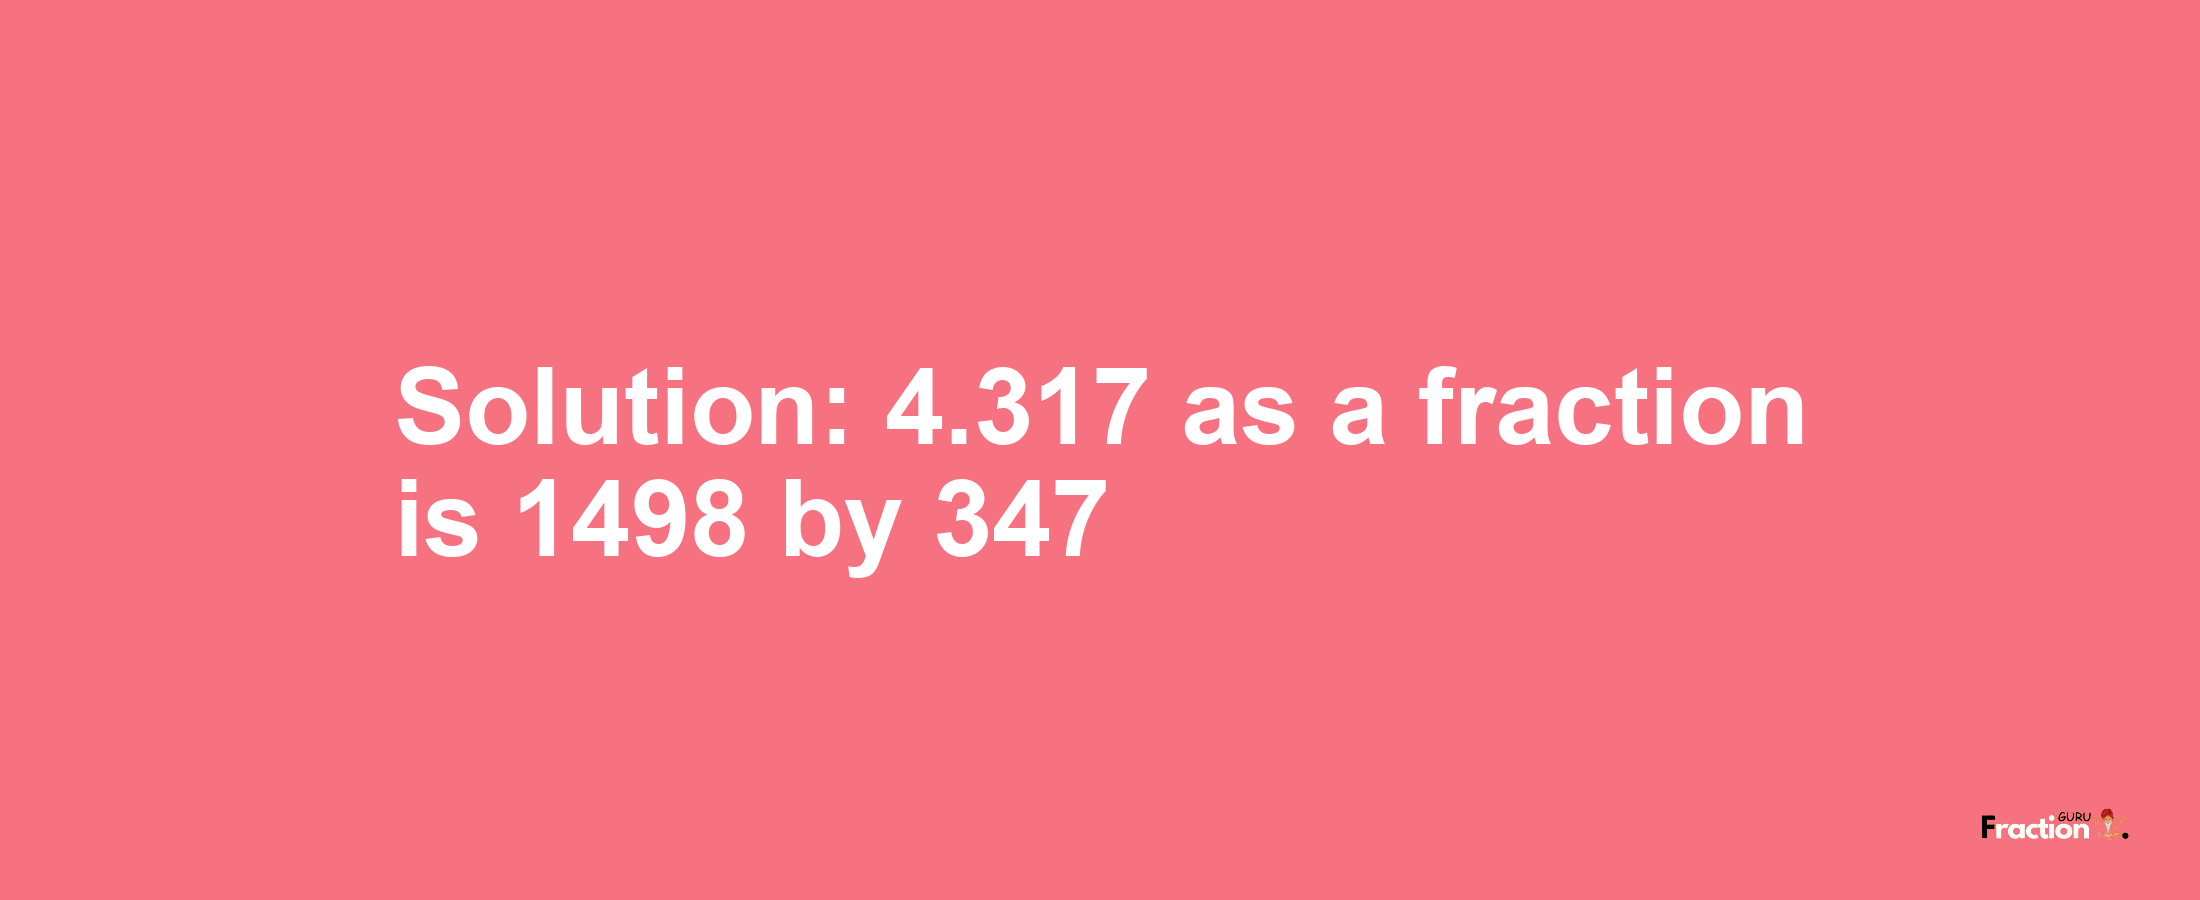 Solution:4.317 as a fraction is 1498/347